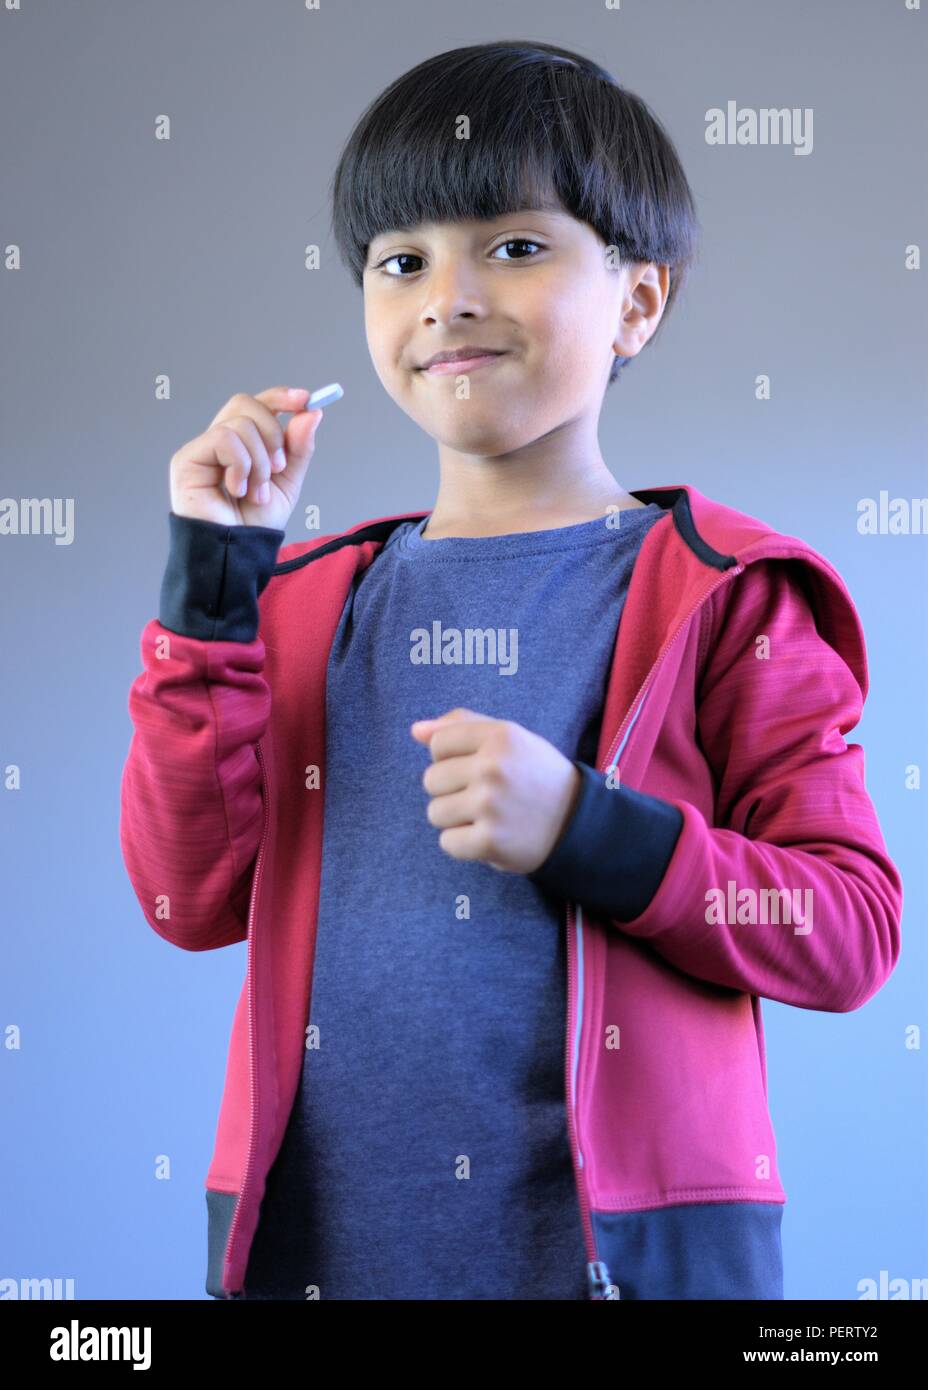 Portrait of smiling kid with pill in hand. Concept of happy kid ready to take medicine or vitamins. Stock Photo